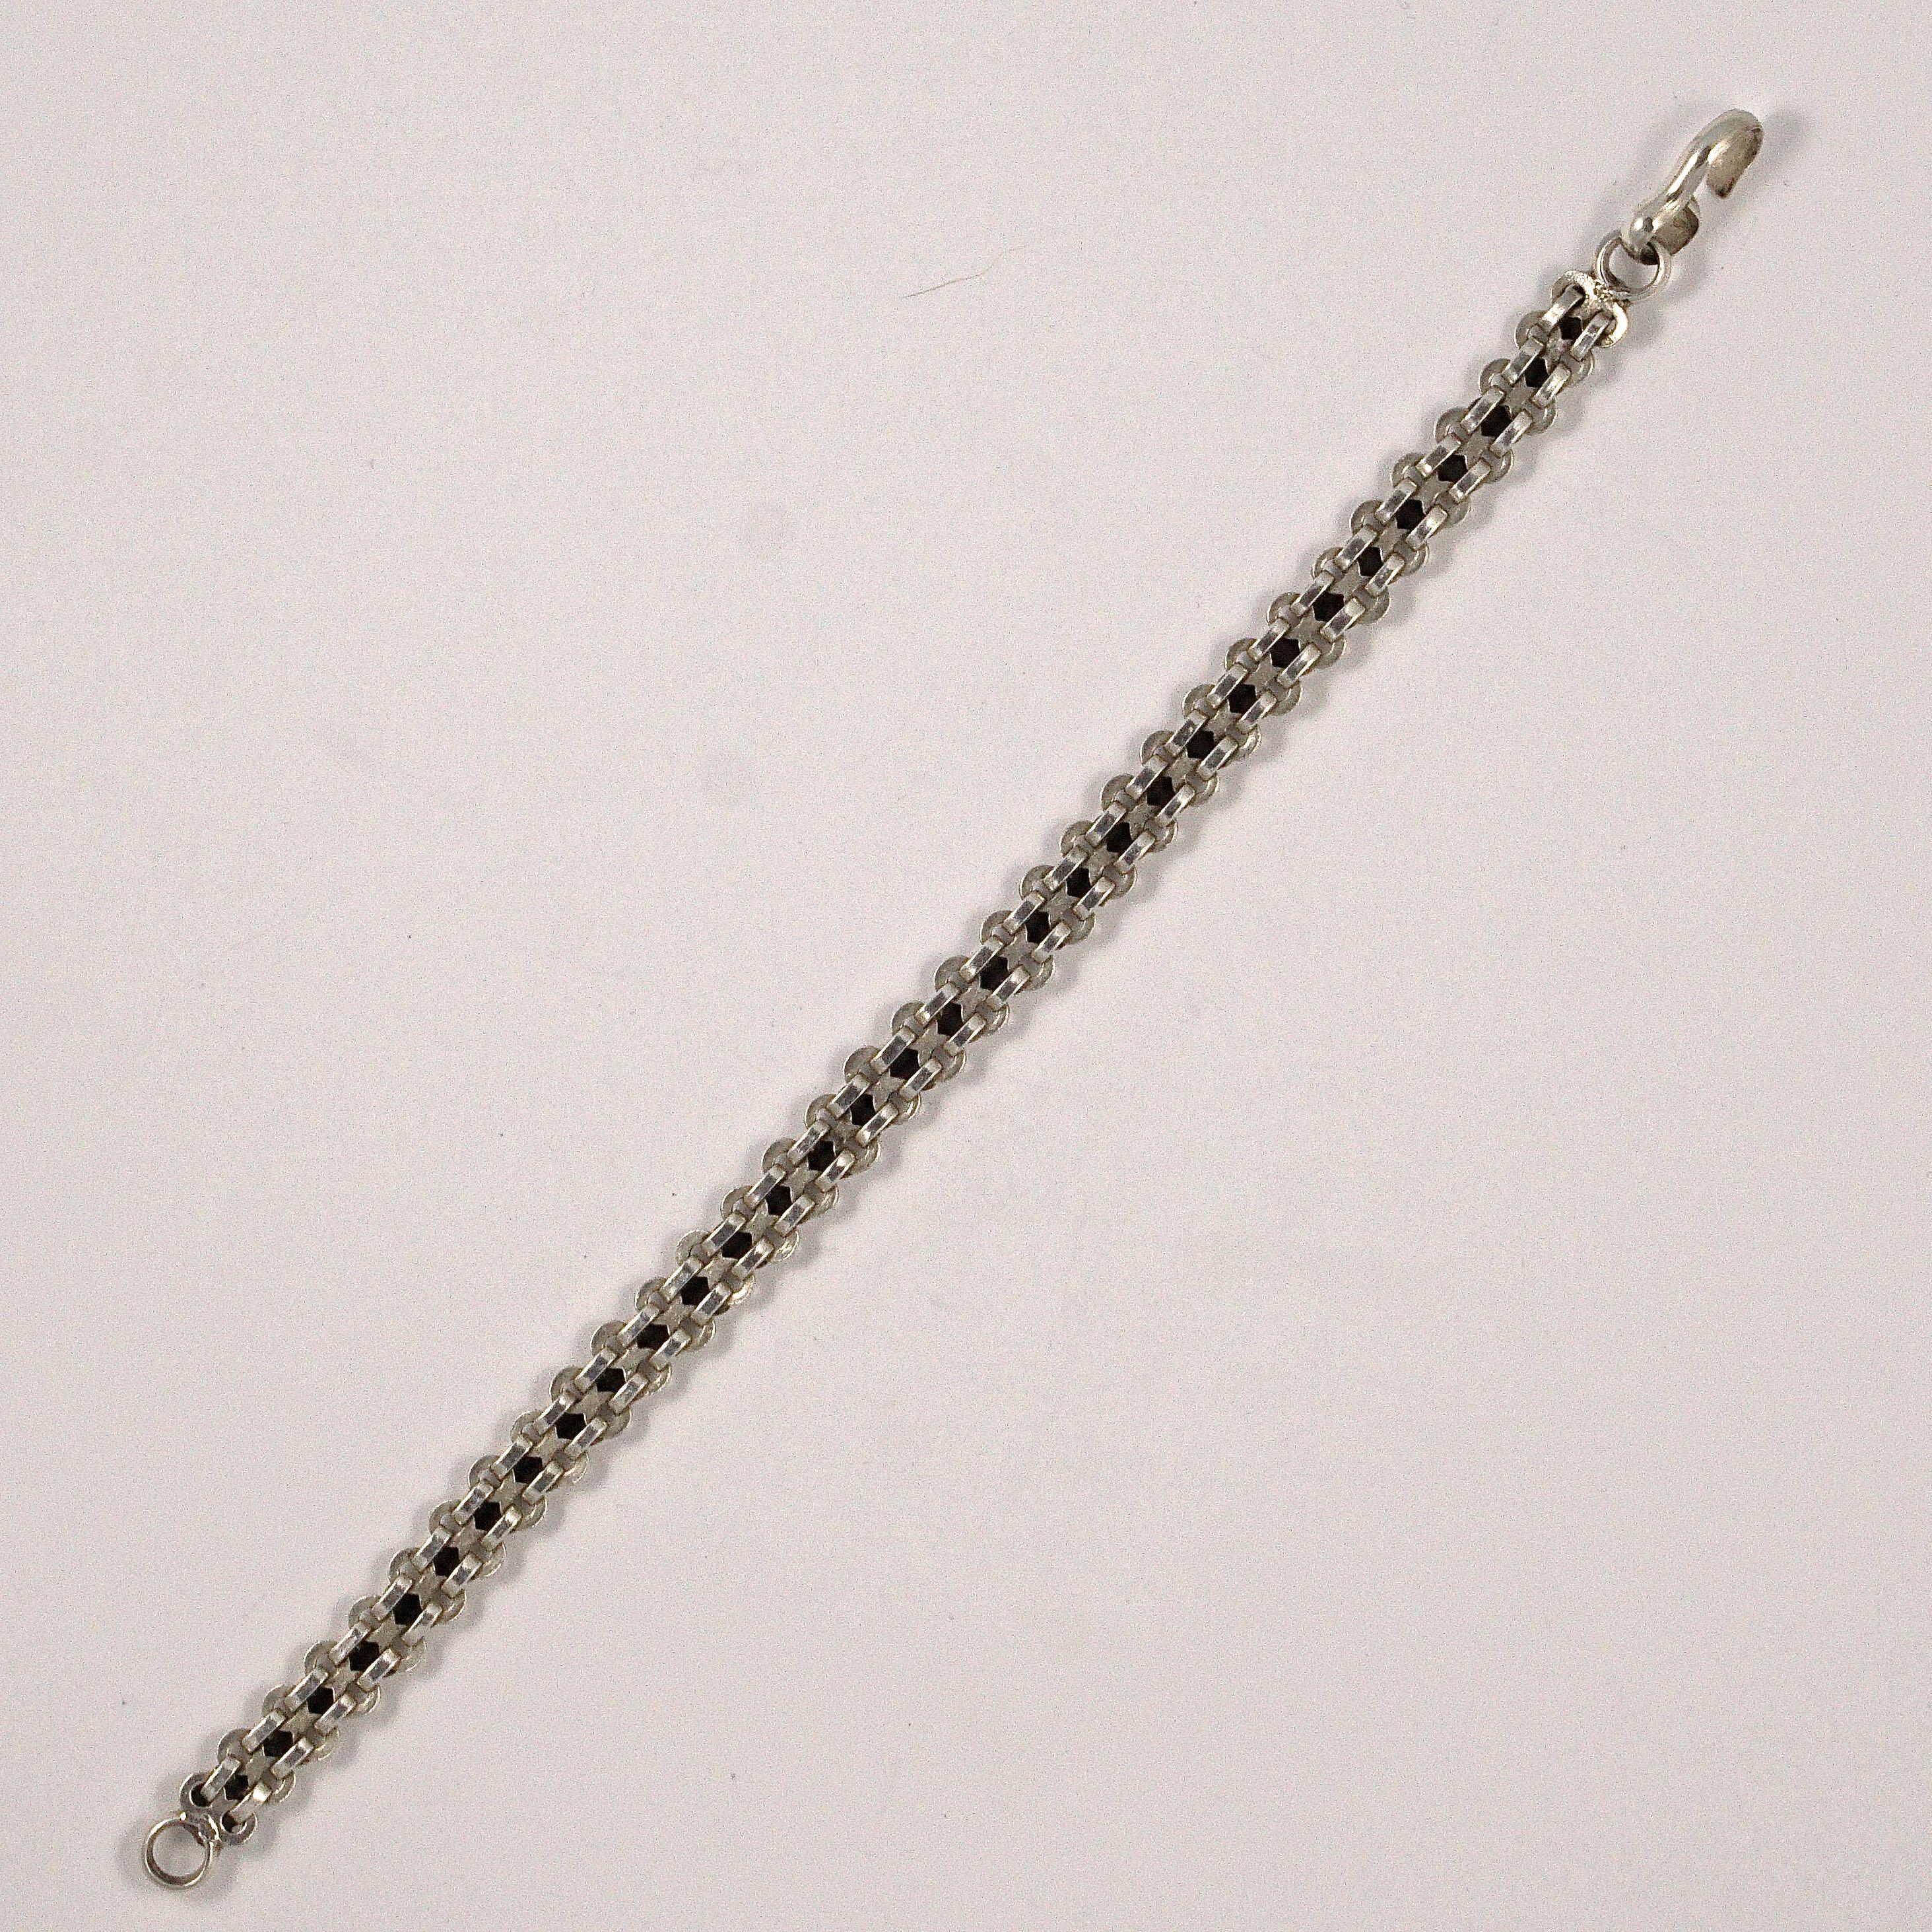 Rajasthan India Silver Chain Decorative Link Bracelet with Simple Hook Fastening 2